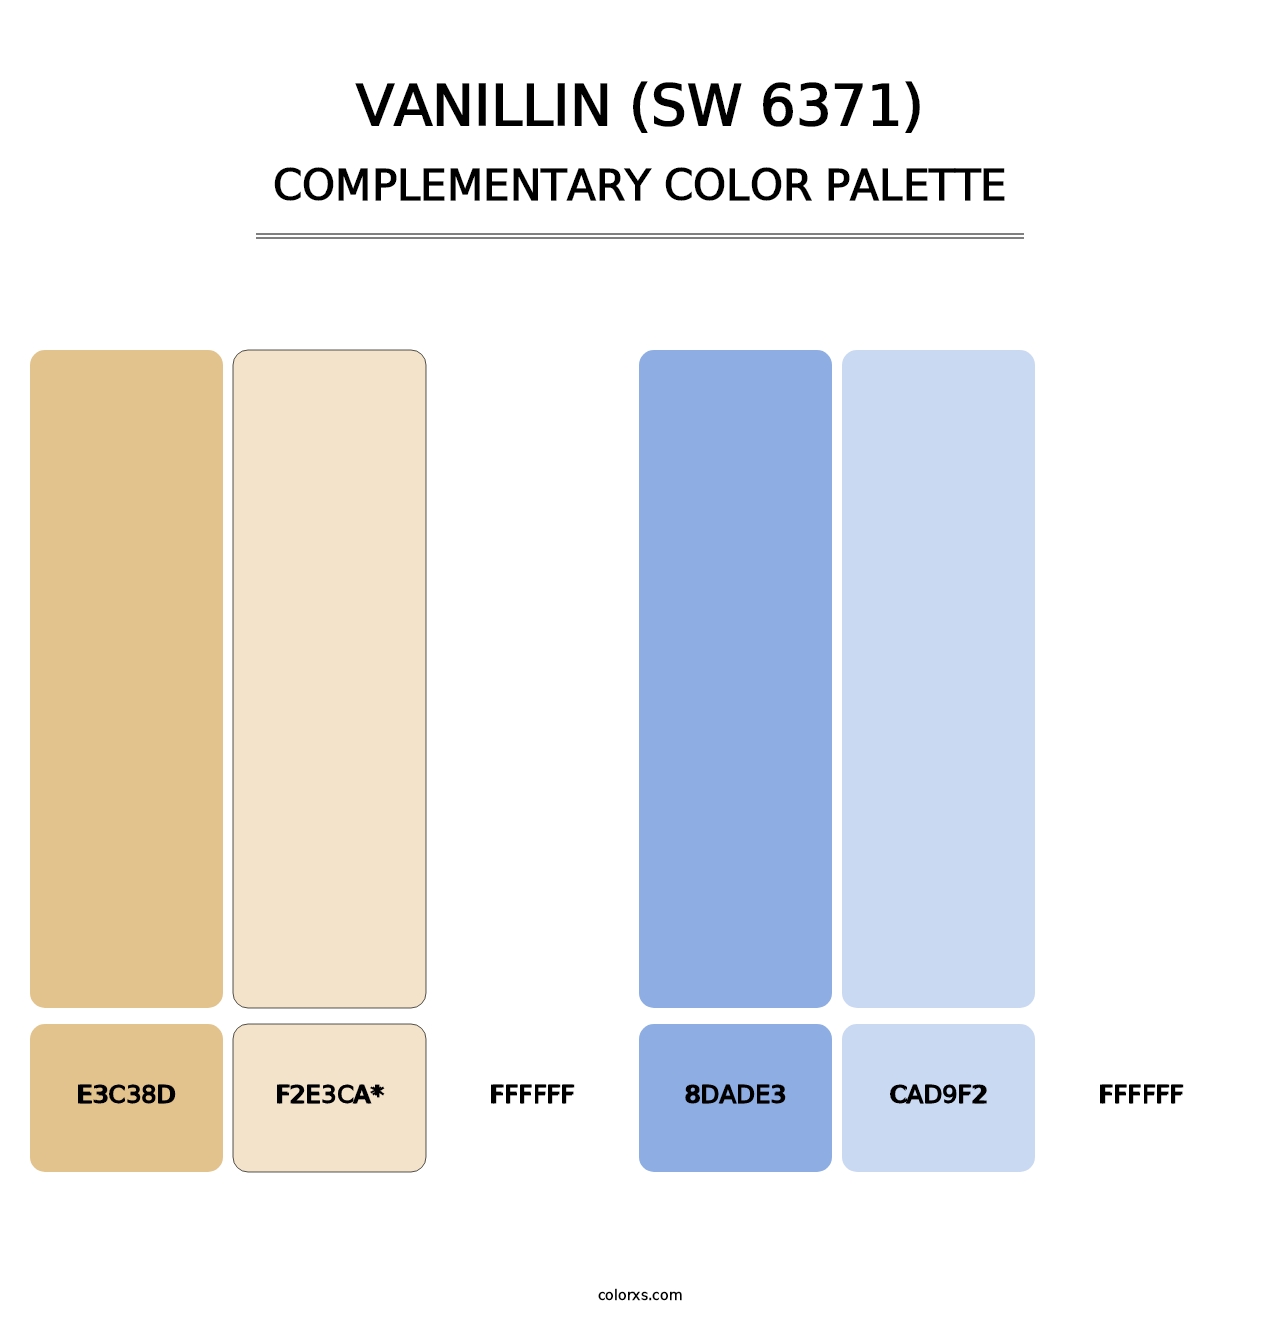 Vanillin (SW 6371) - Complementary Color Palette